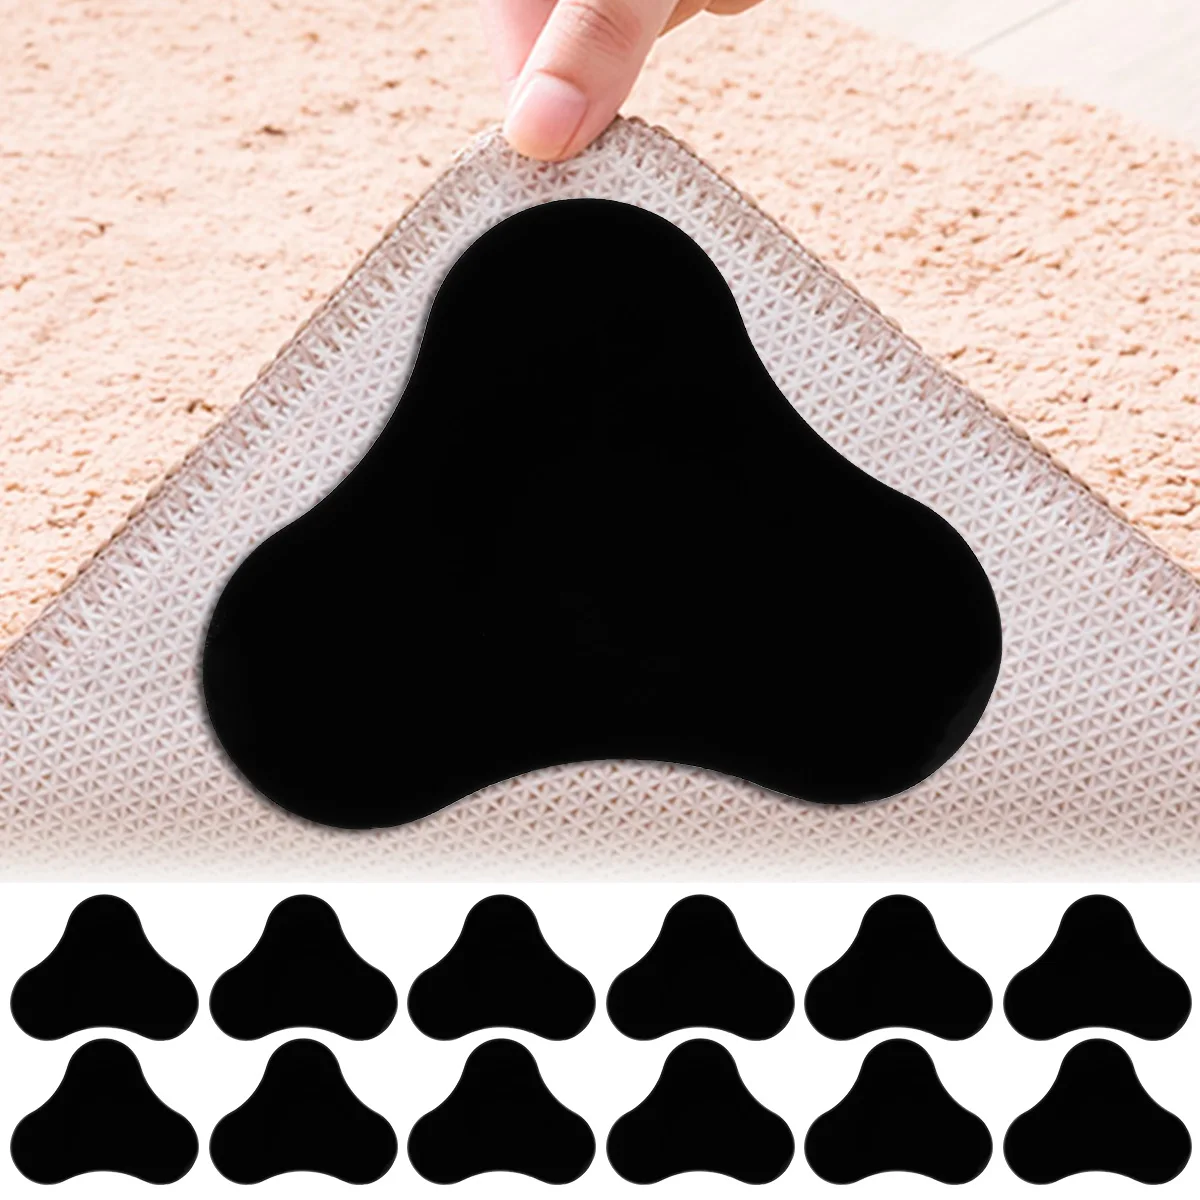 Pro Space 4 in. x 4 in. x 0.08 in. Rug Pads Grippers Carpet Tape